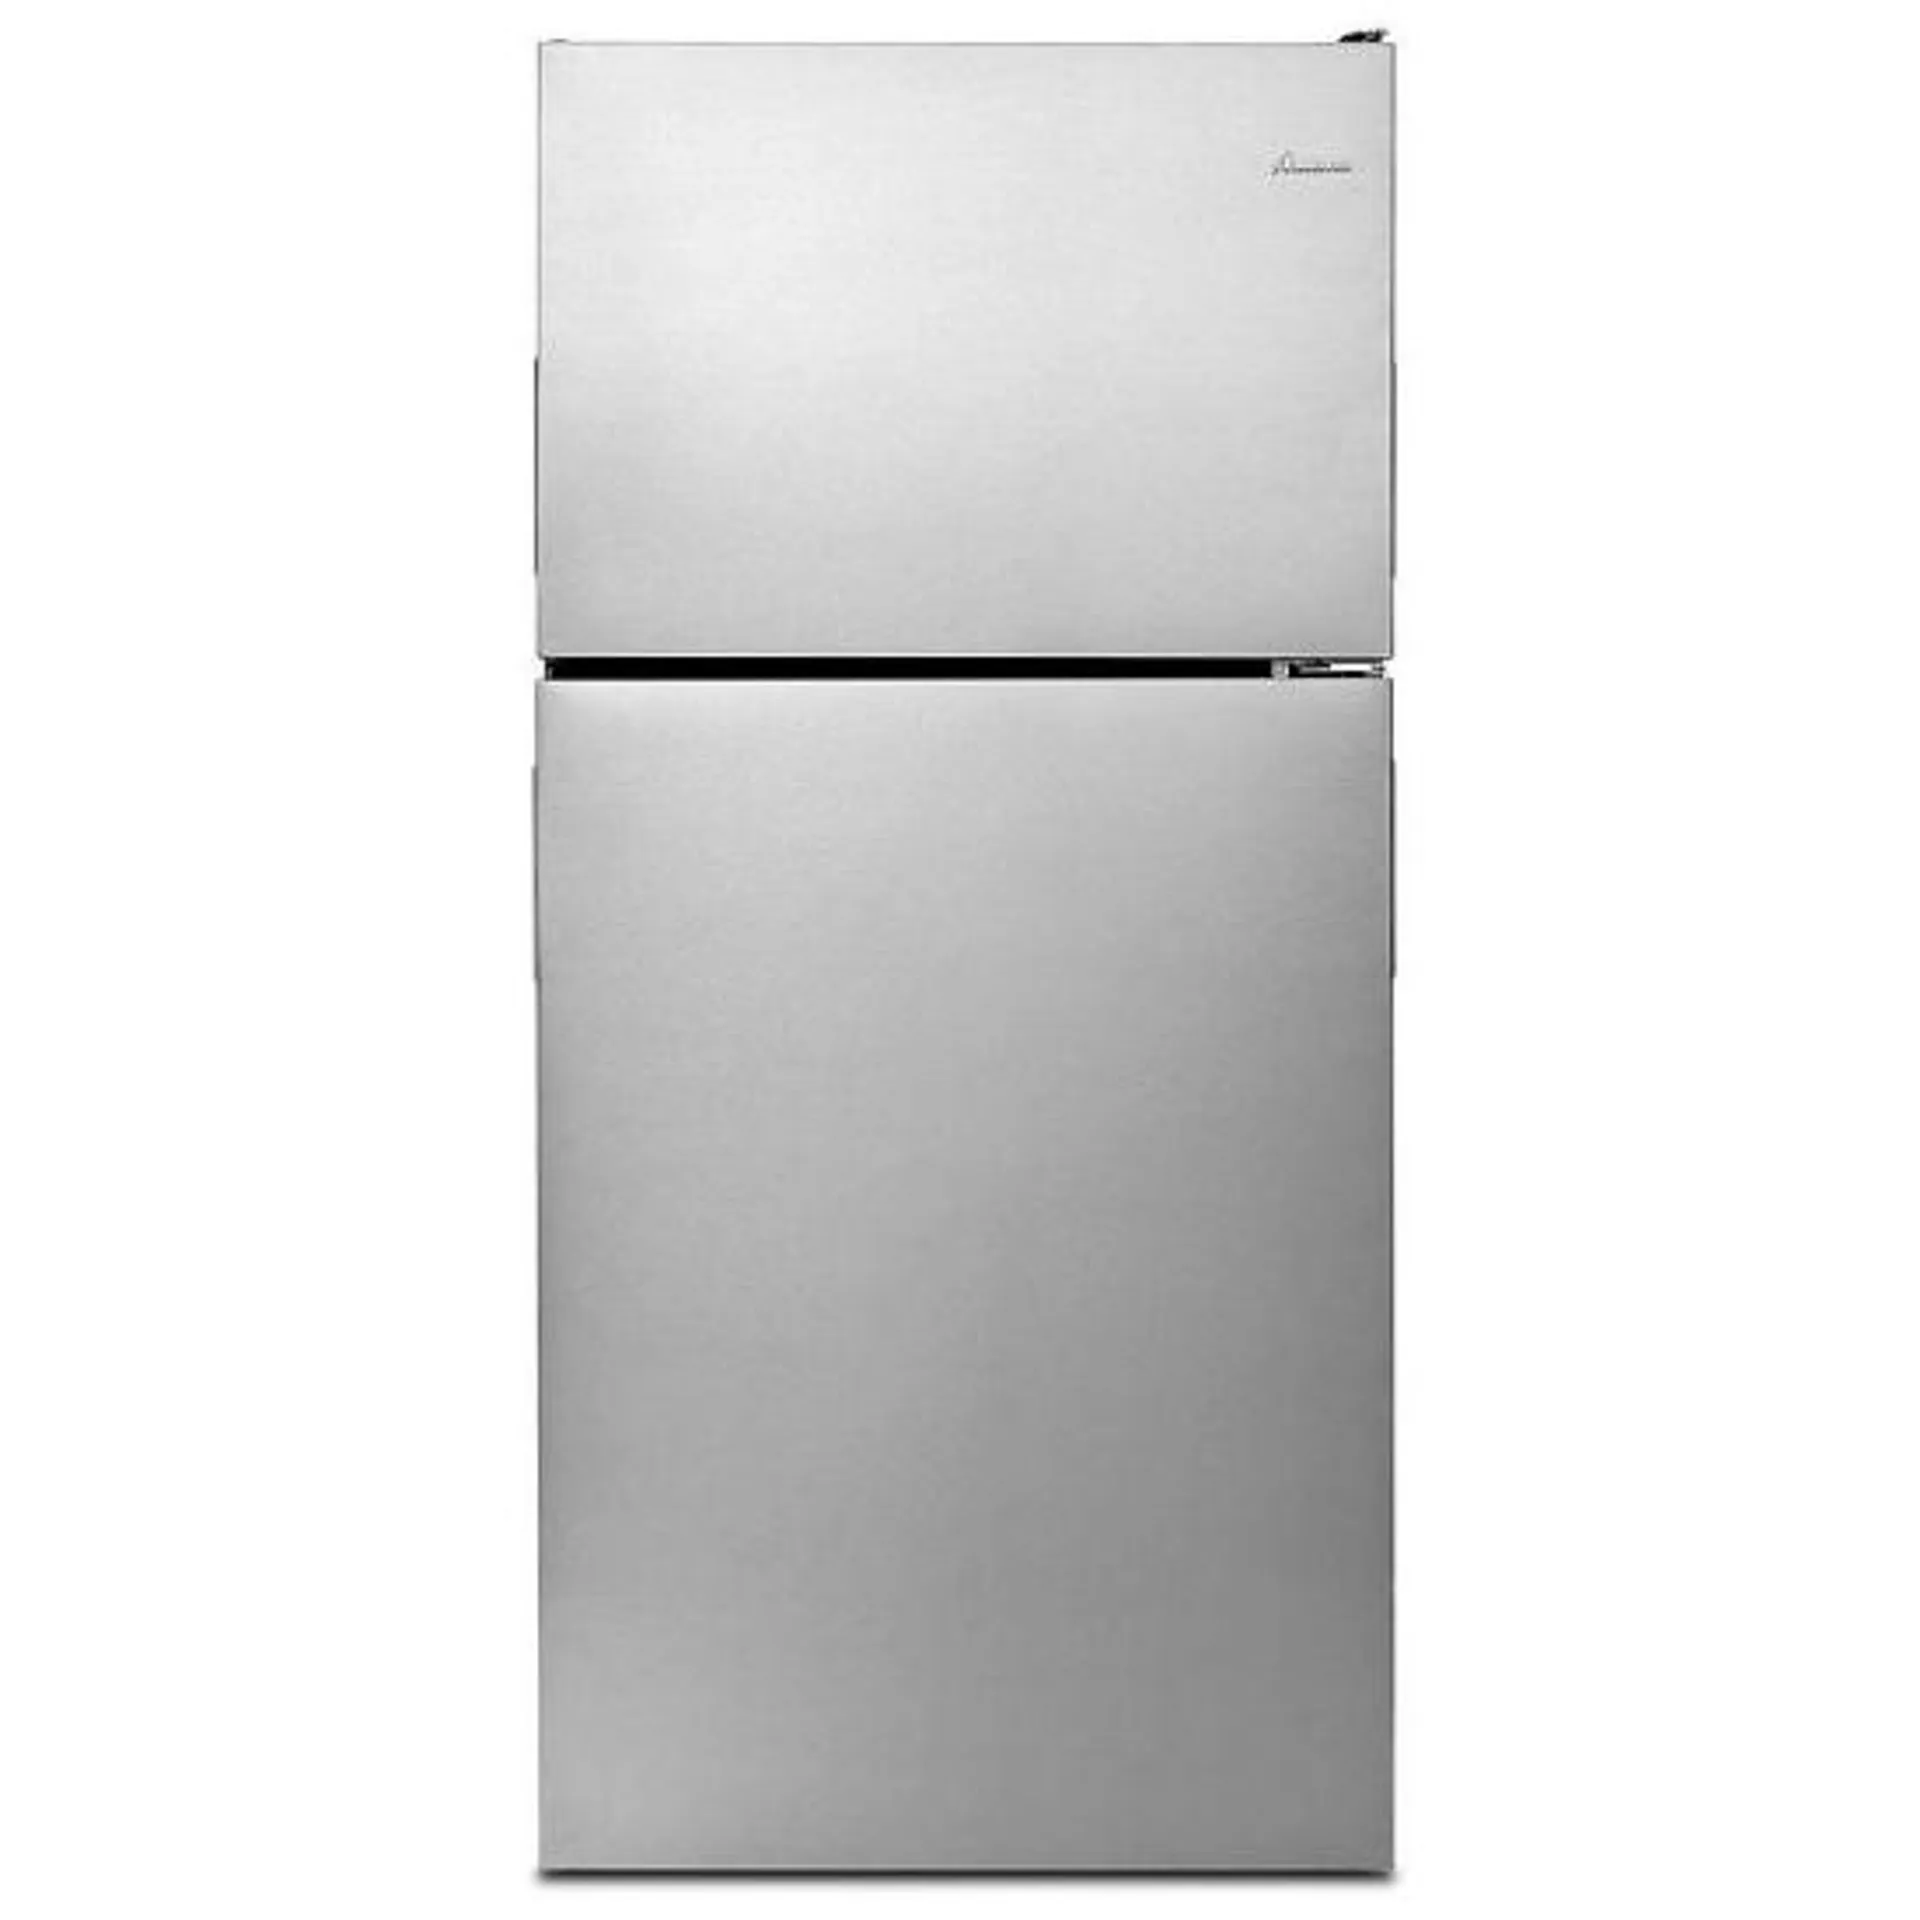 Amana ART318FFDS Top Freezer Refrigerator, 30 inch Width, 18.2 cu. ft. Capacity, Stainless Steel colour